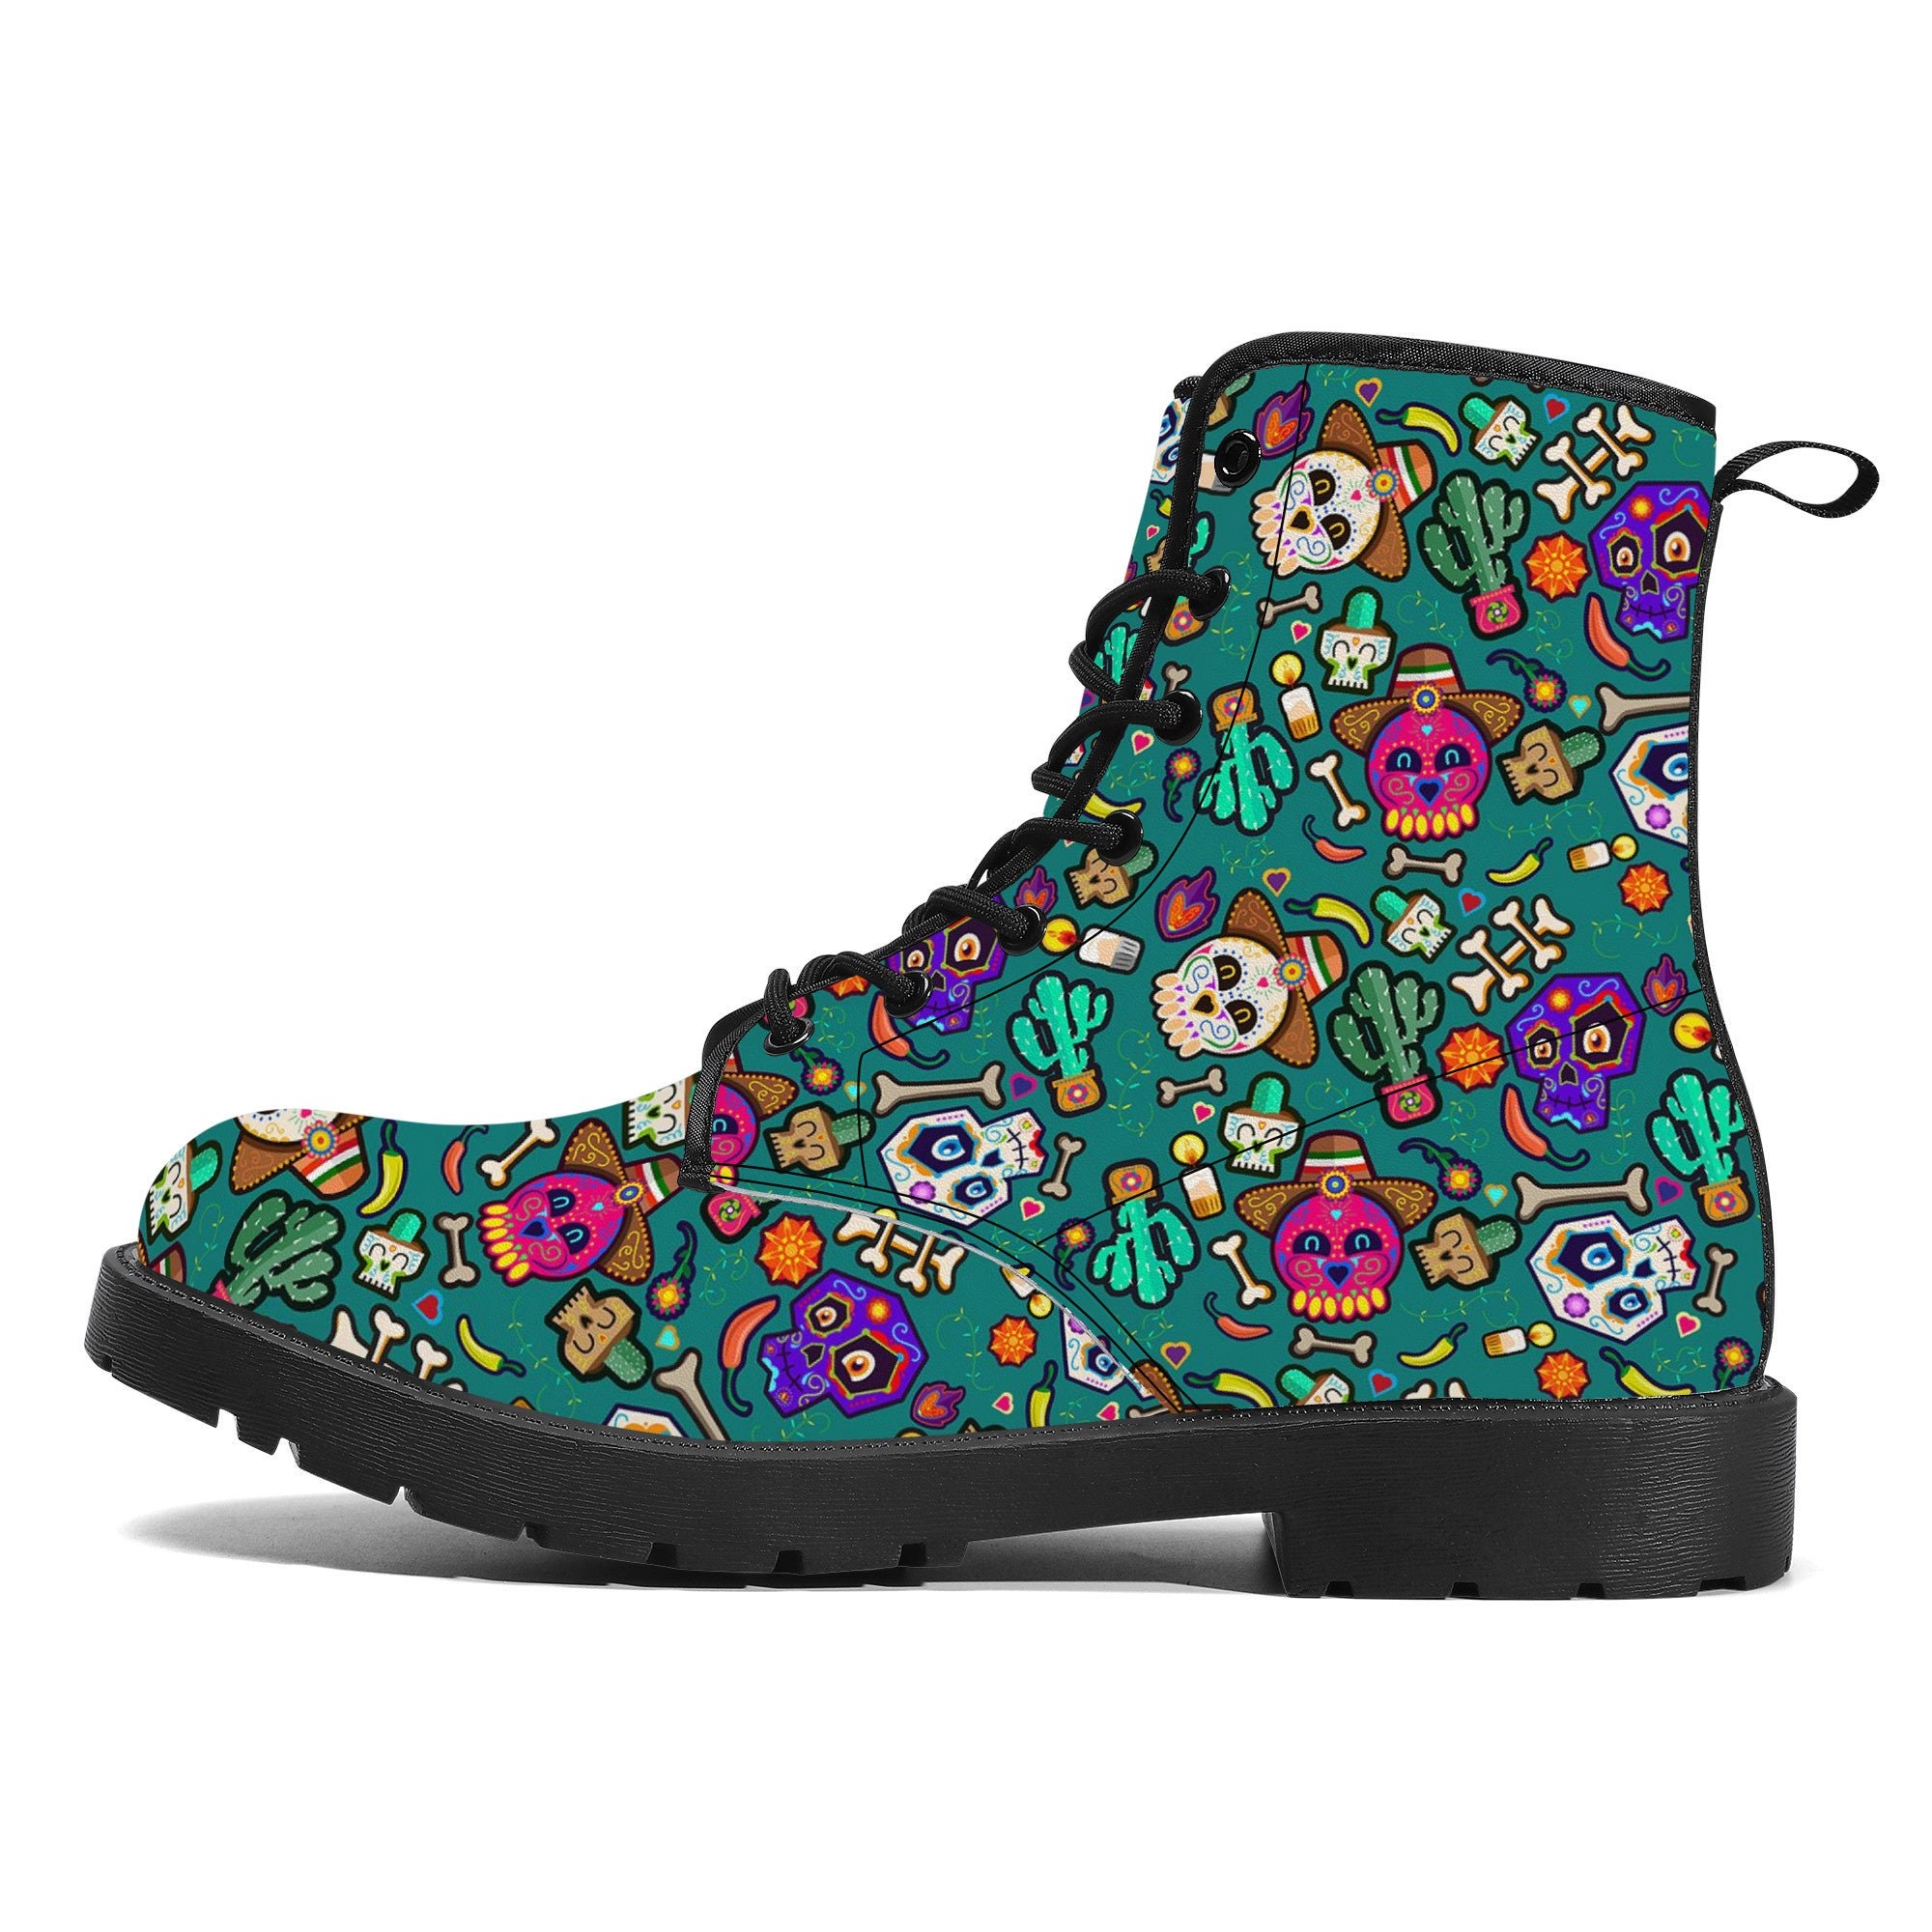 Sugar Skull UGG Boots Hand Painted Colorful Mexican Style 